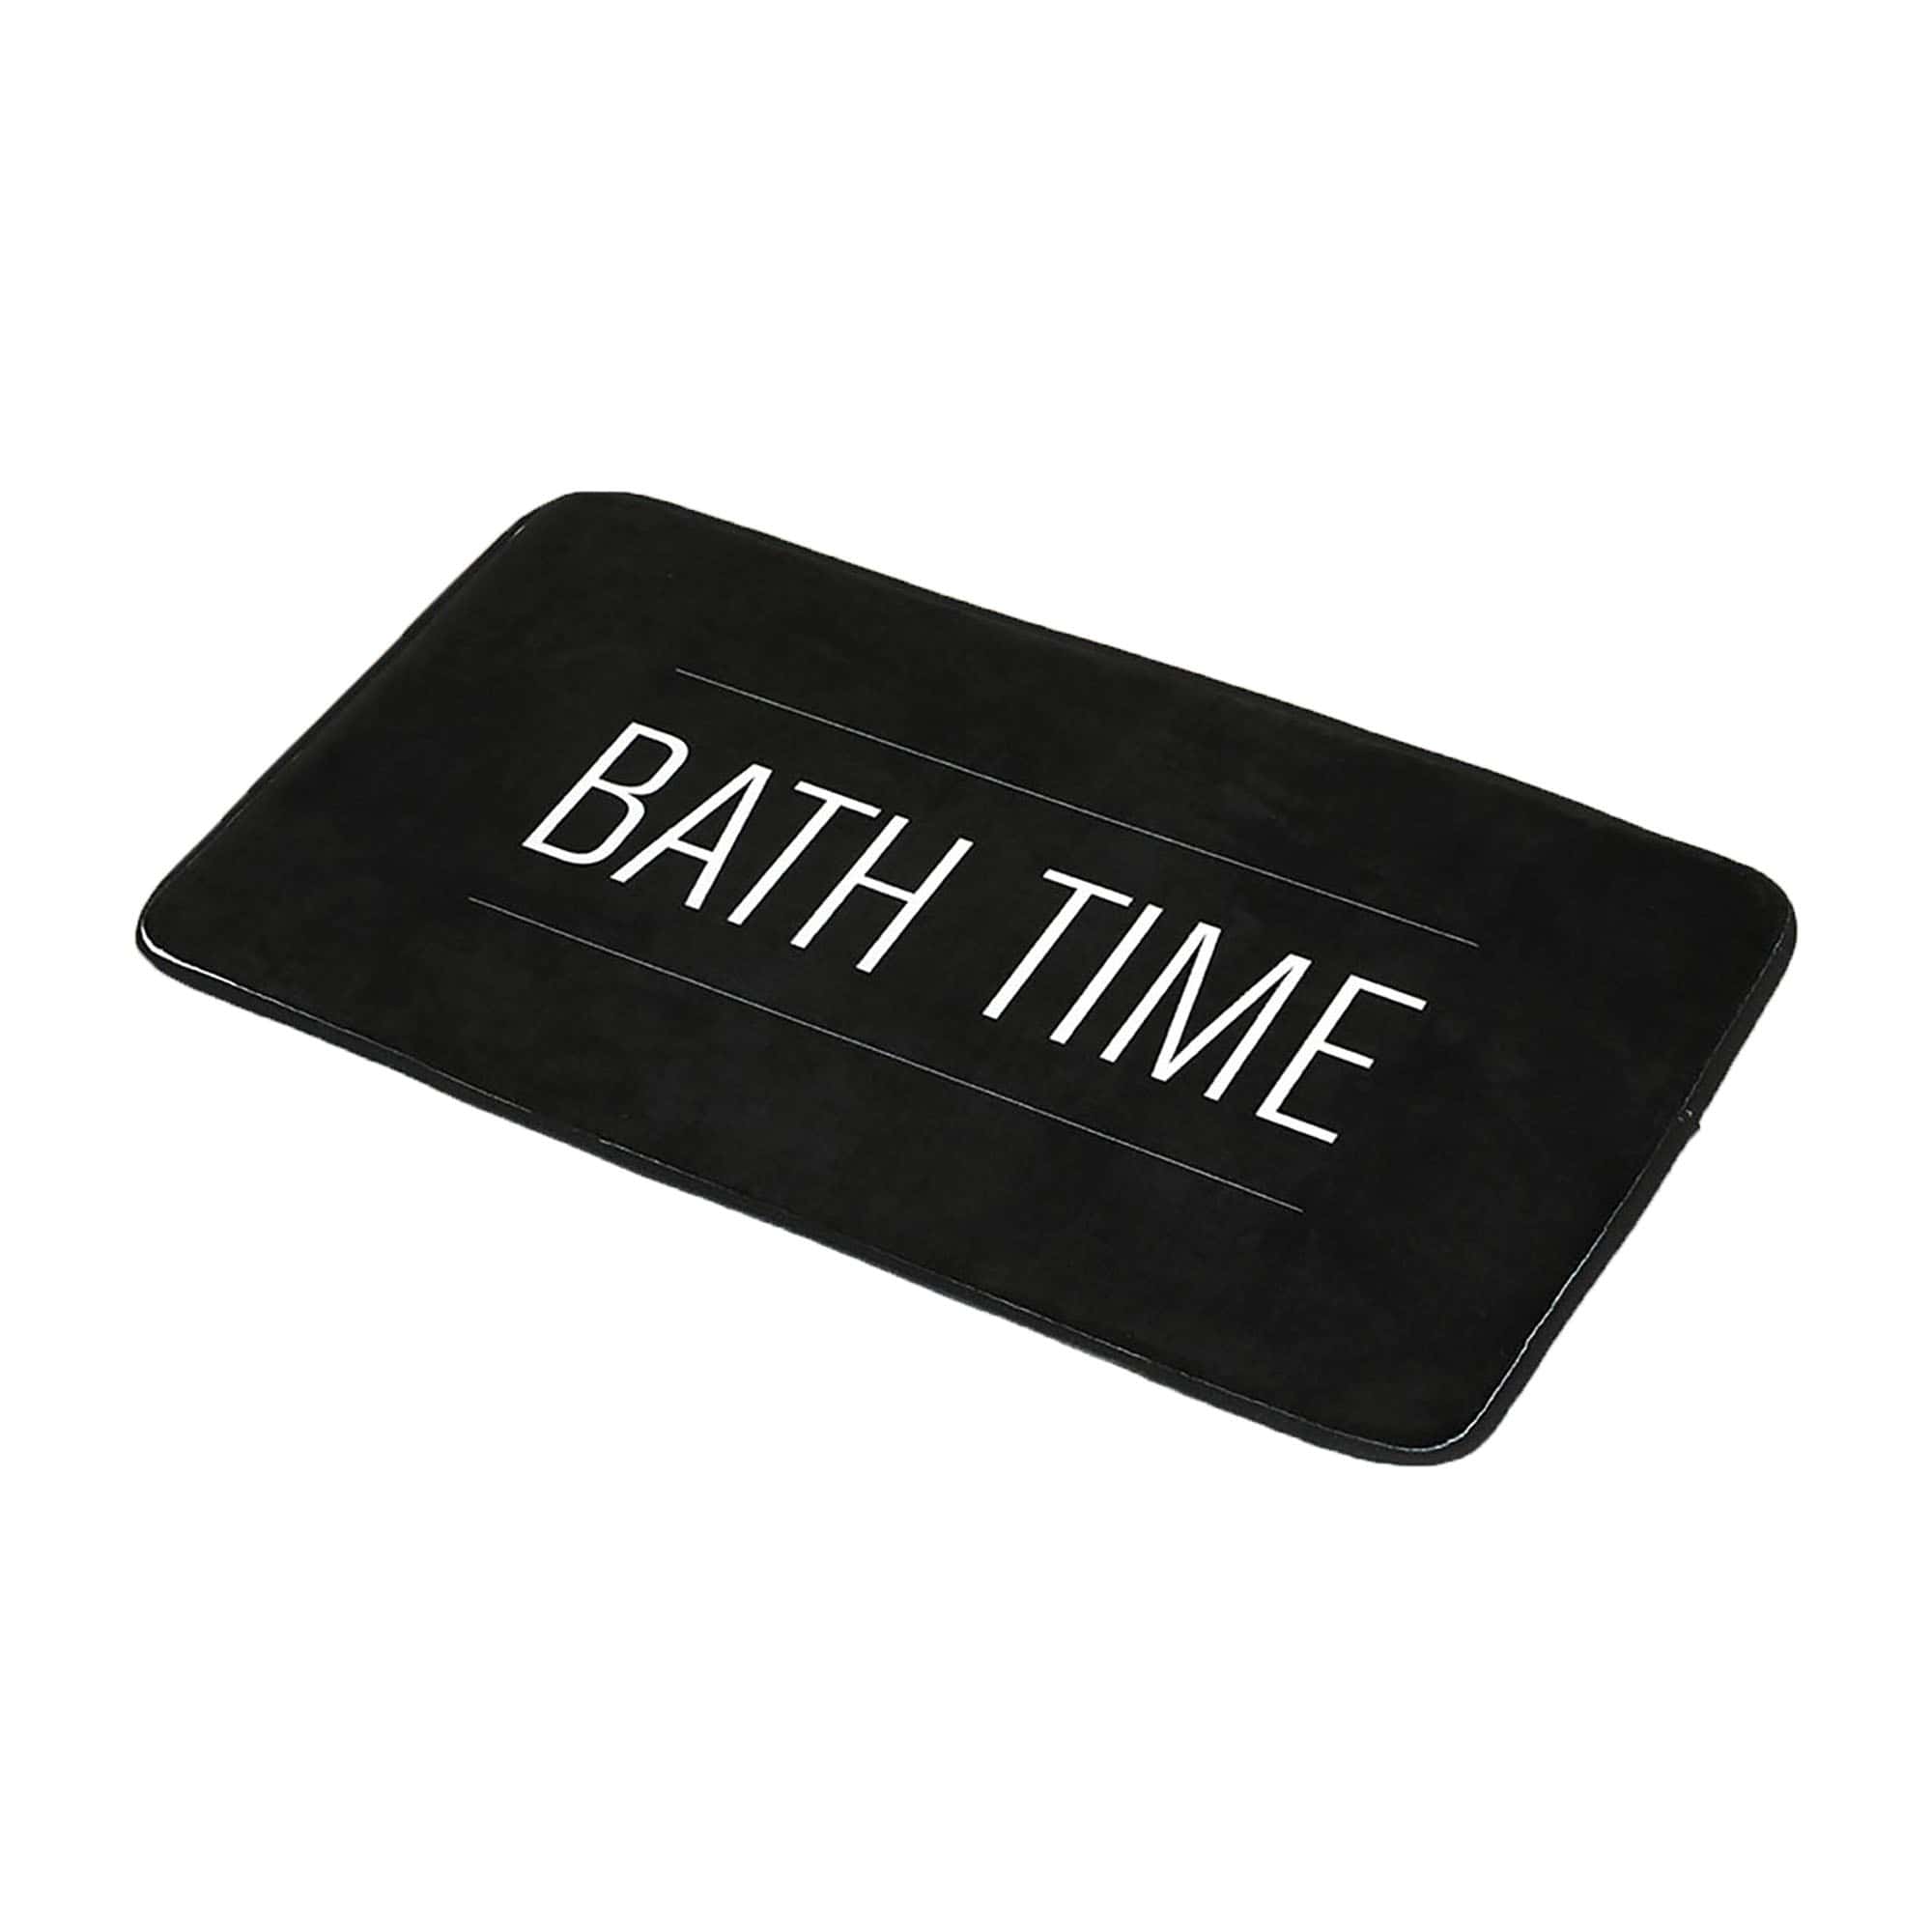 https://evideco.com/wp-content/uploads/2023/05/7701727-Premium-Non-Slip-Microfiber-Bathmat-30-x-18-Inches-Elegant-%E2%80%98Bath-Time-Text-in-White-on-Black-Surface-for-Luxurious-Comfort-and-Safety-1-main.jpg